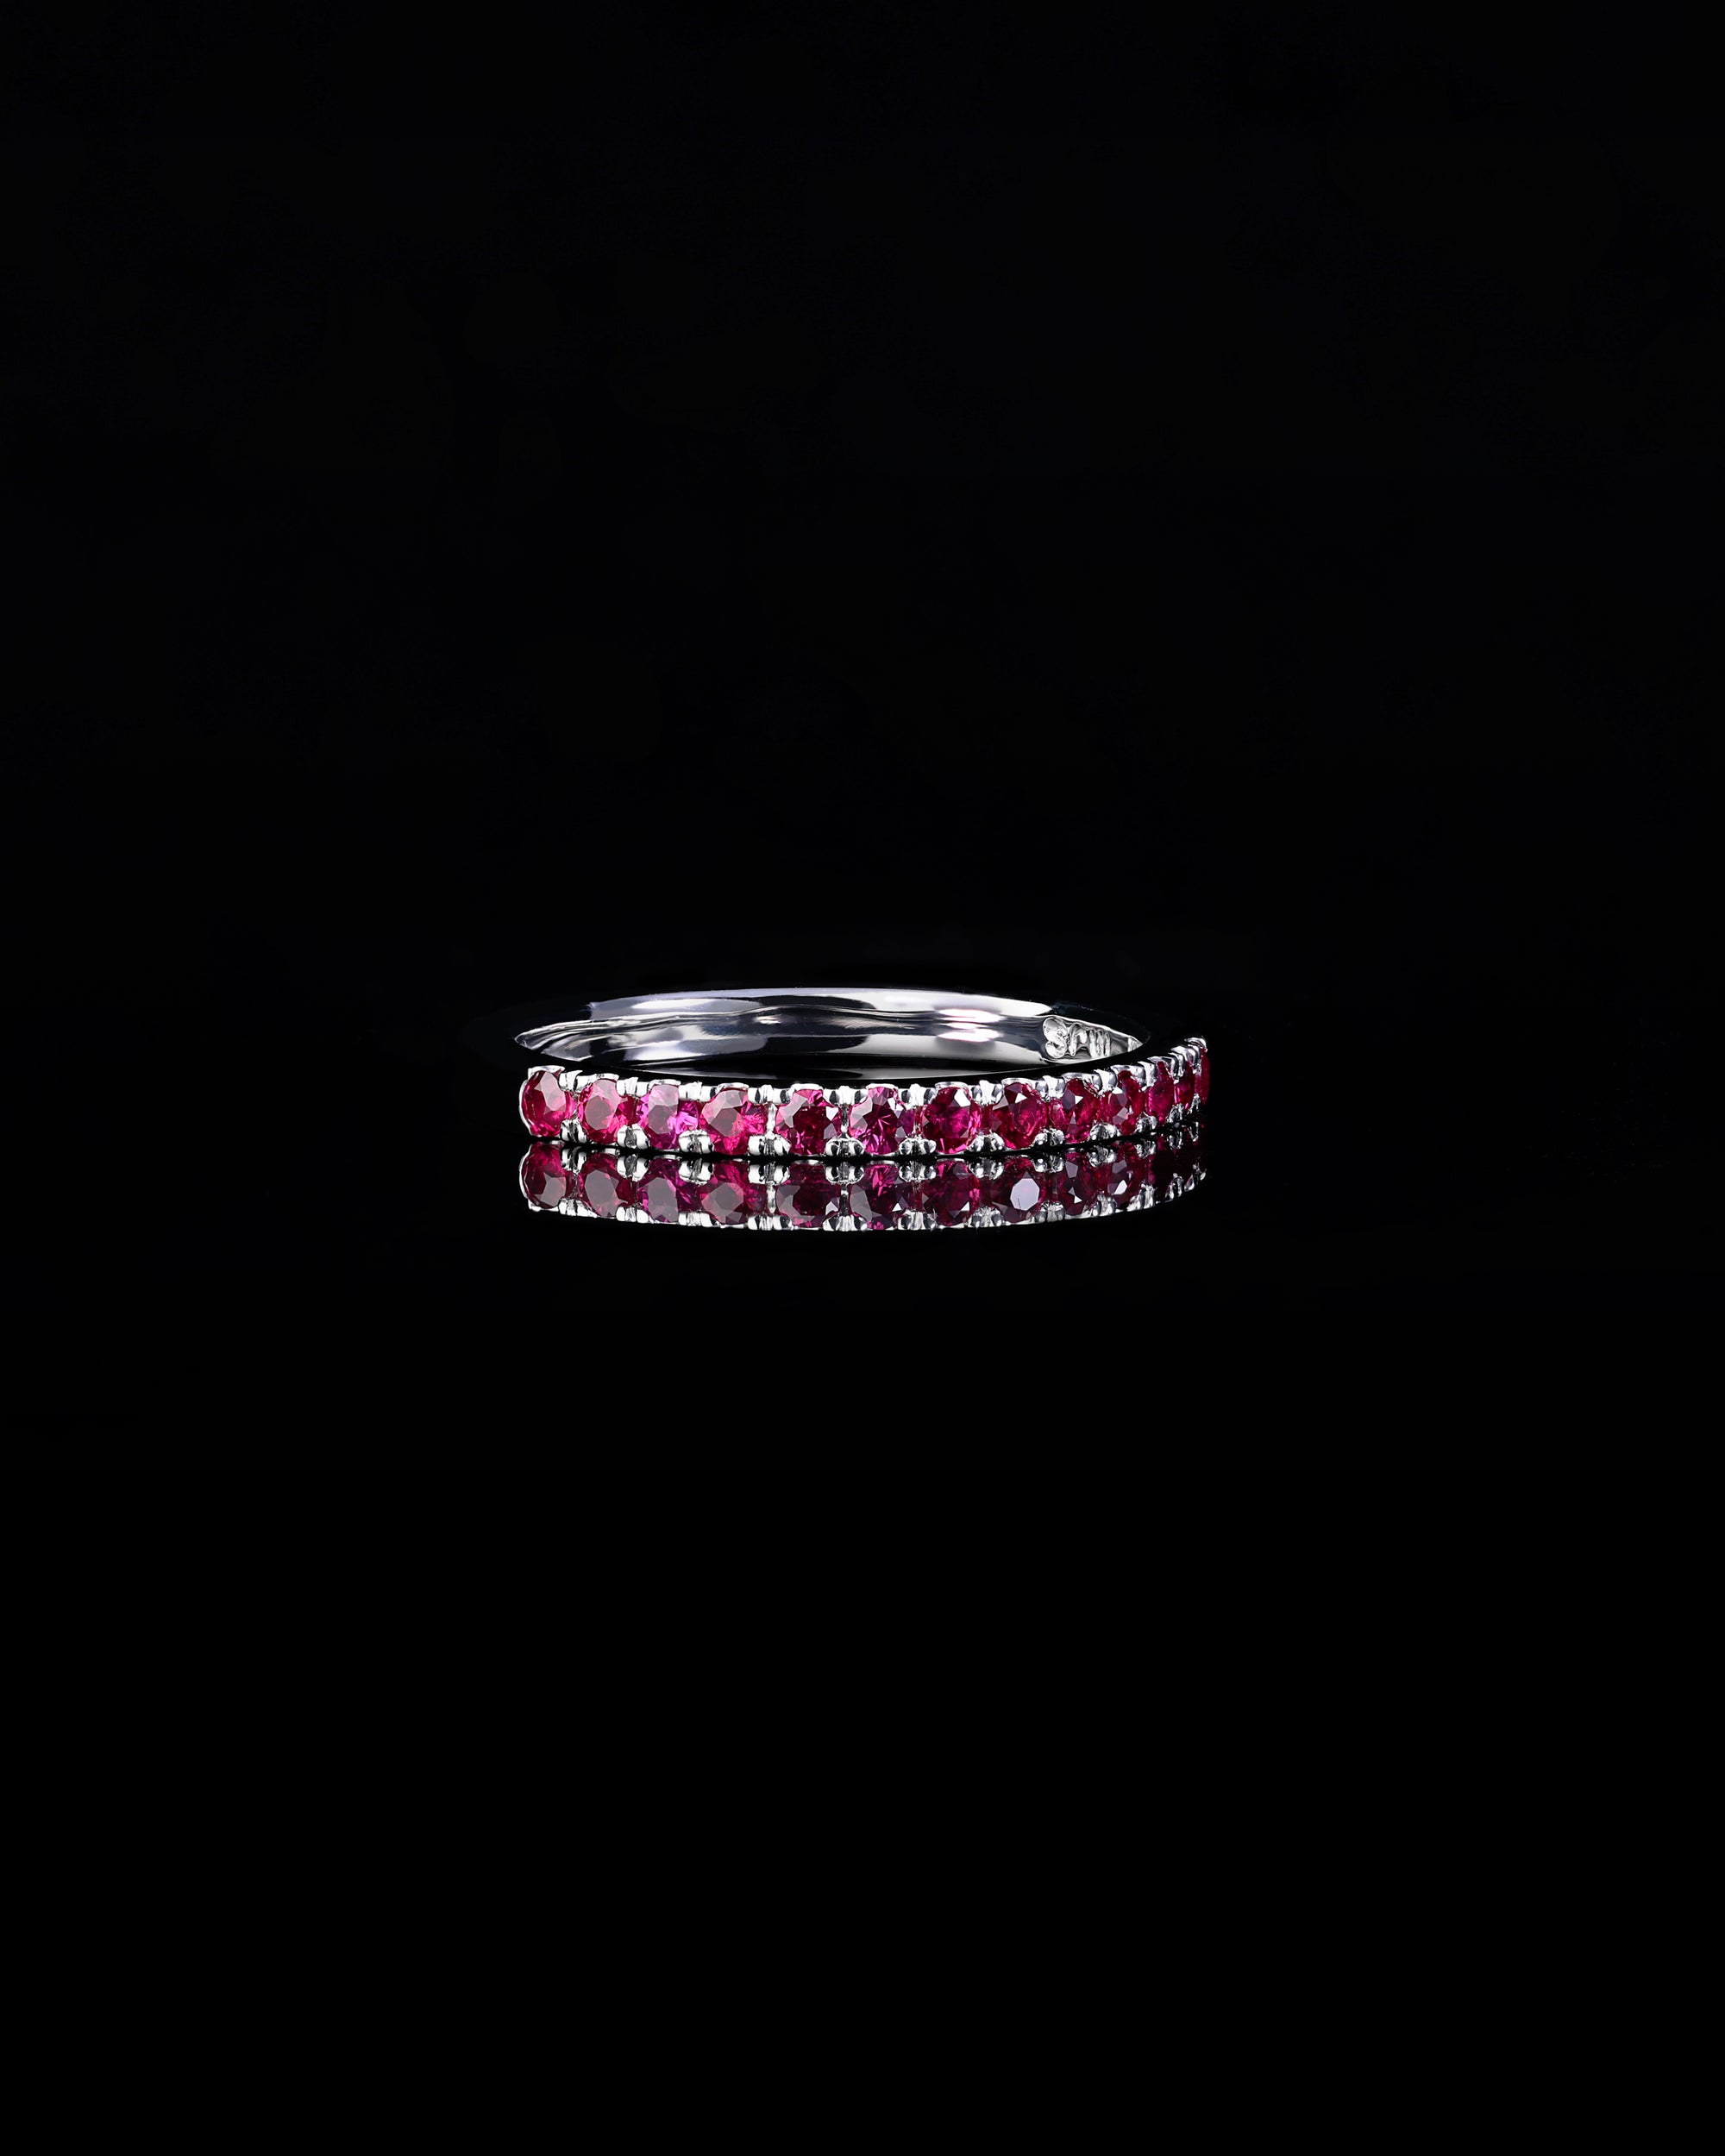 Handcrafted 18ct White Gold band half set with Rubies.